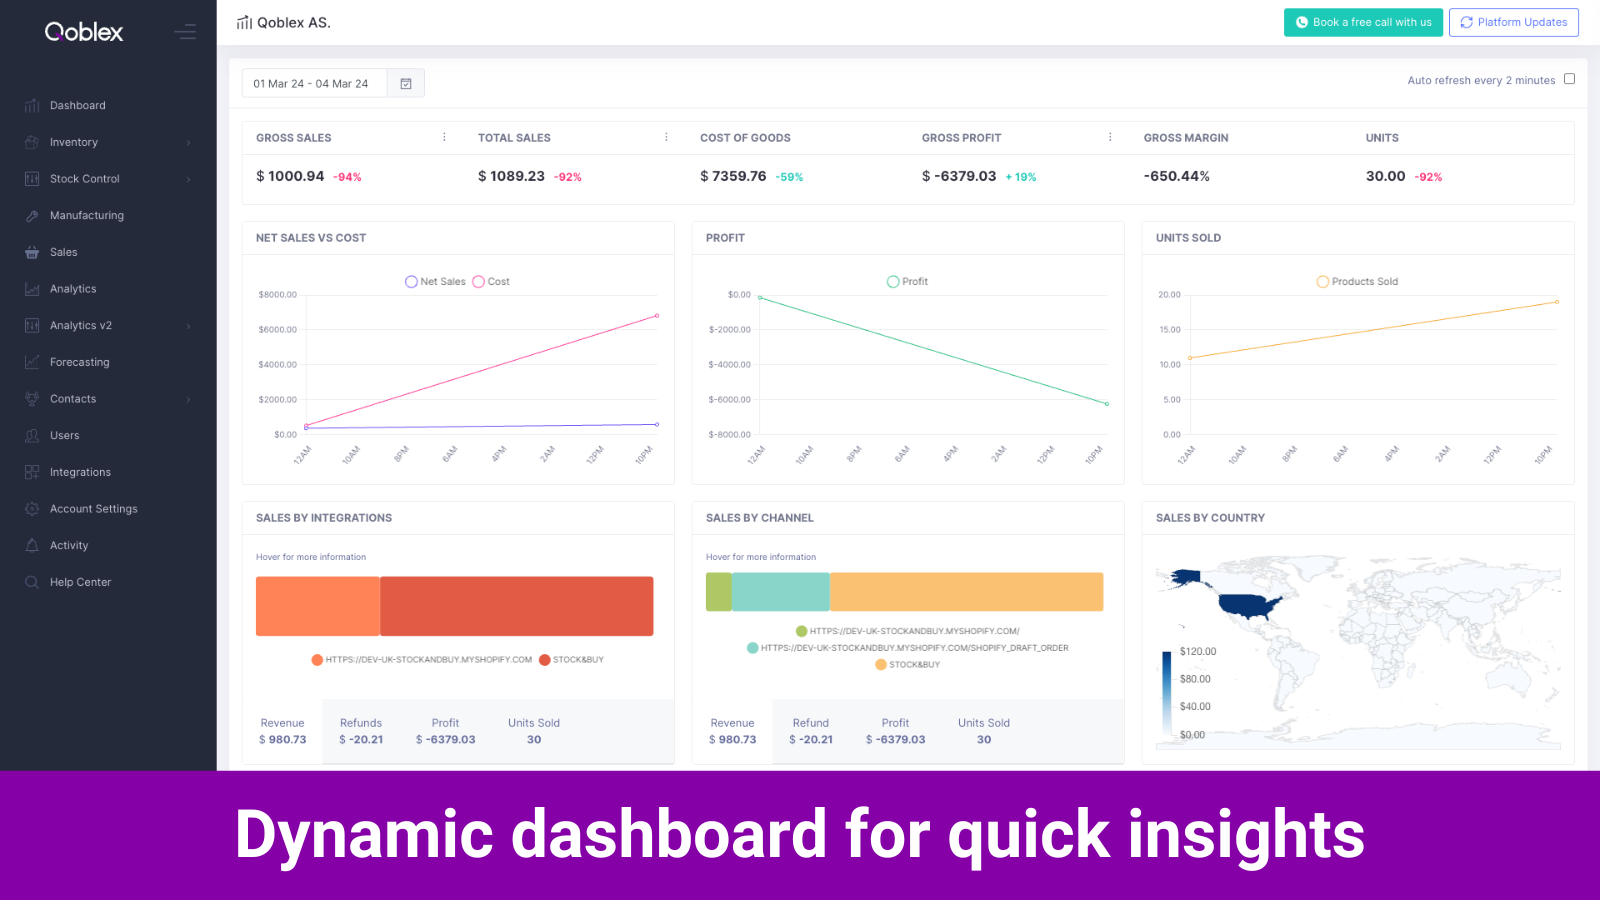 Dynamic dashboard for quick insights